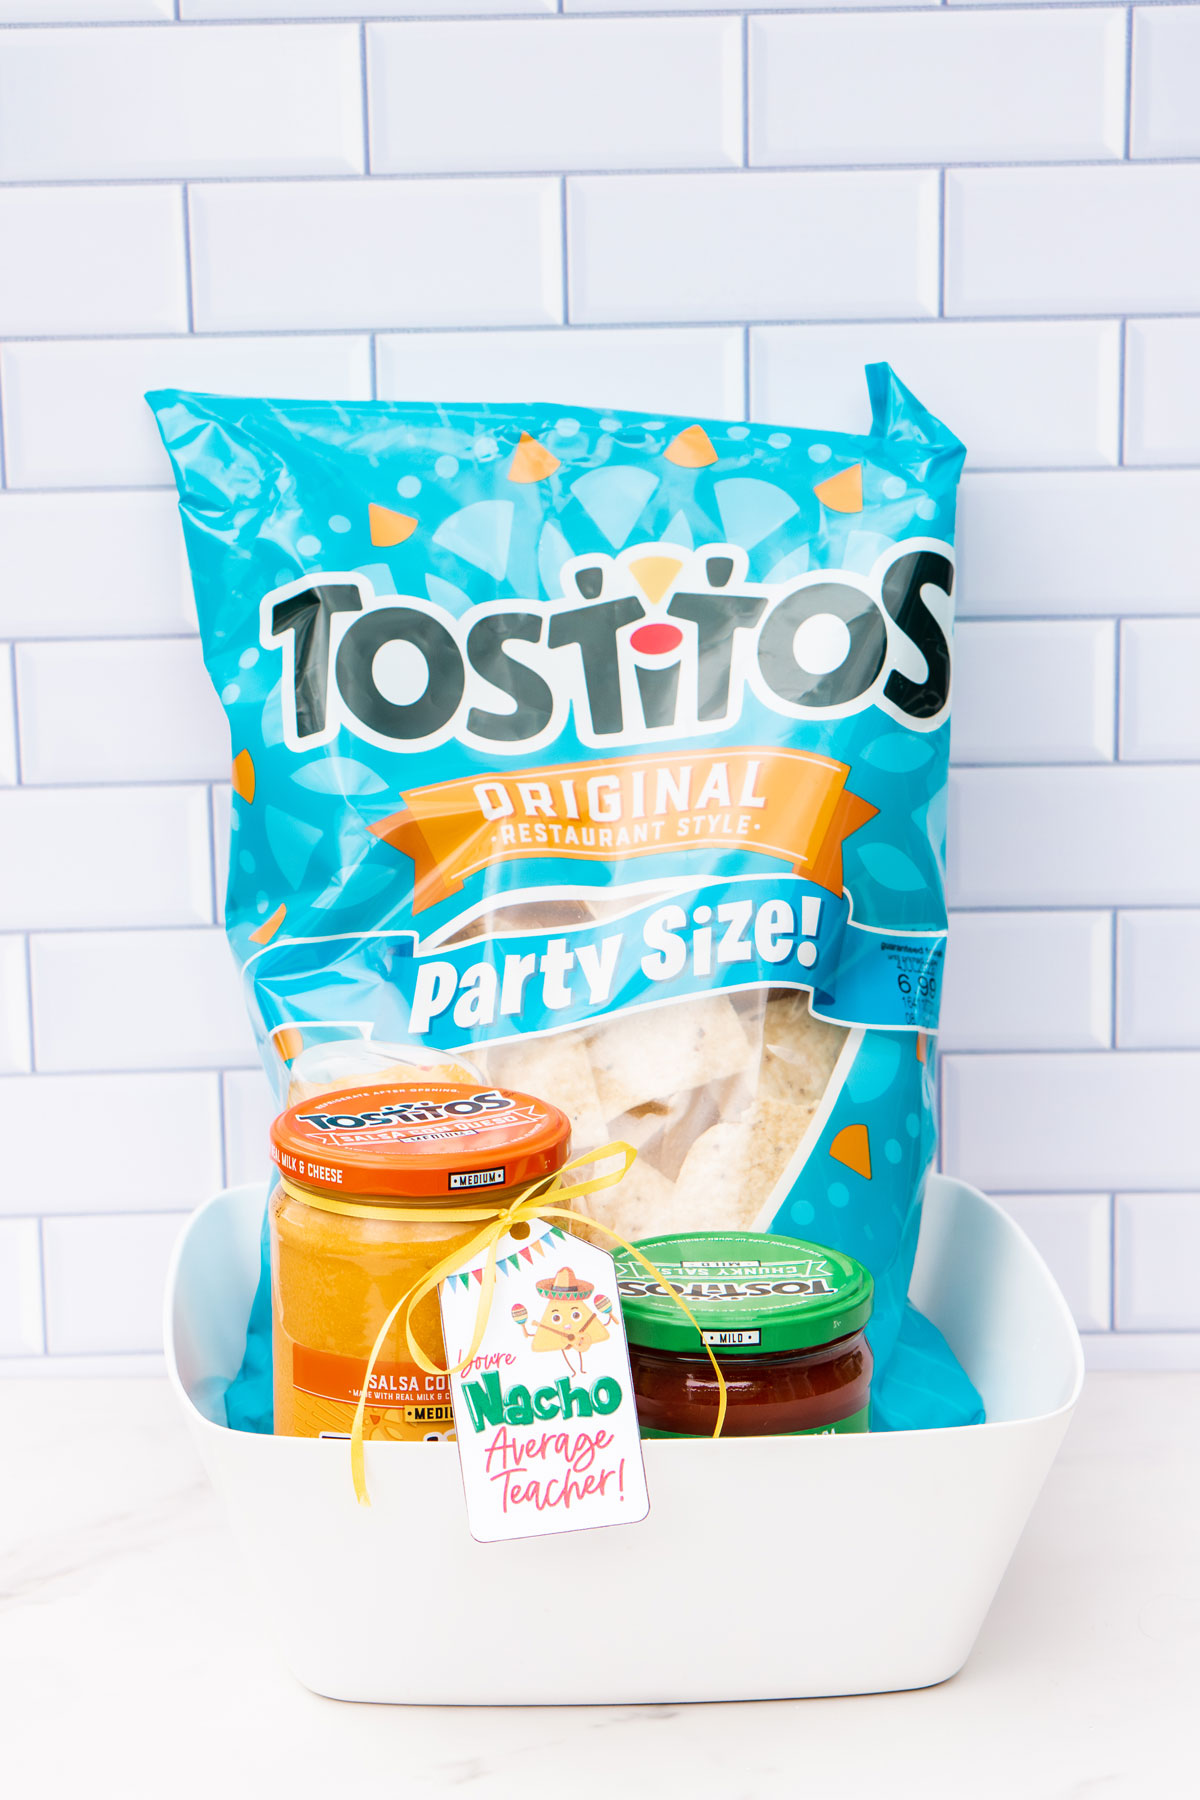 This image shows a bag of Tostitos chips, queso cheese, and a jar of salsa. There is a tag that says You're nacho average teacher.